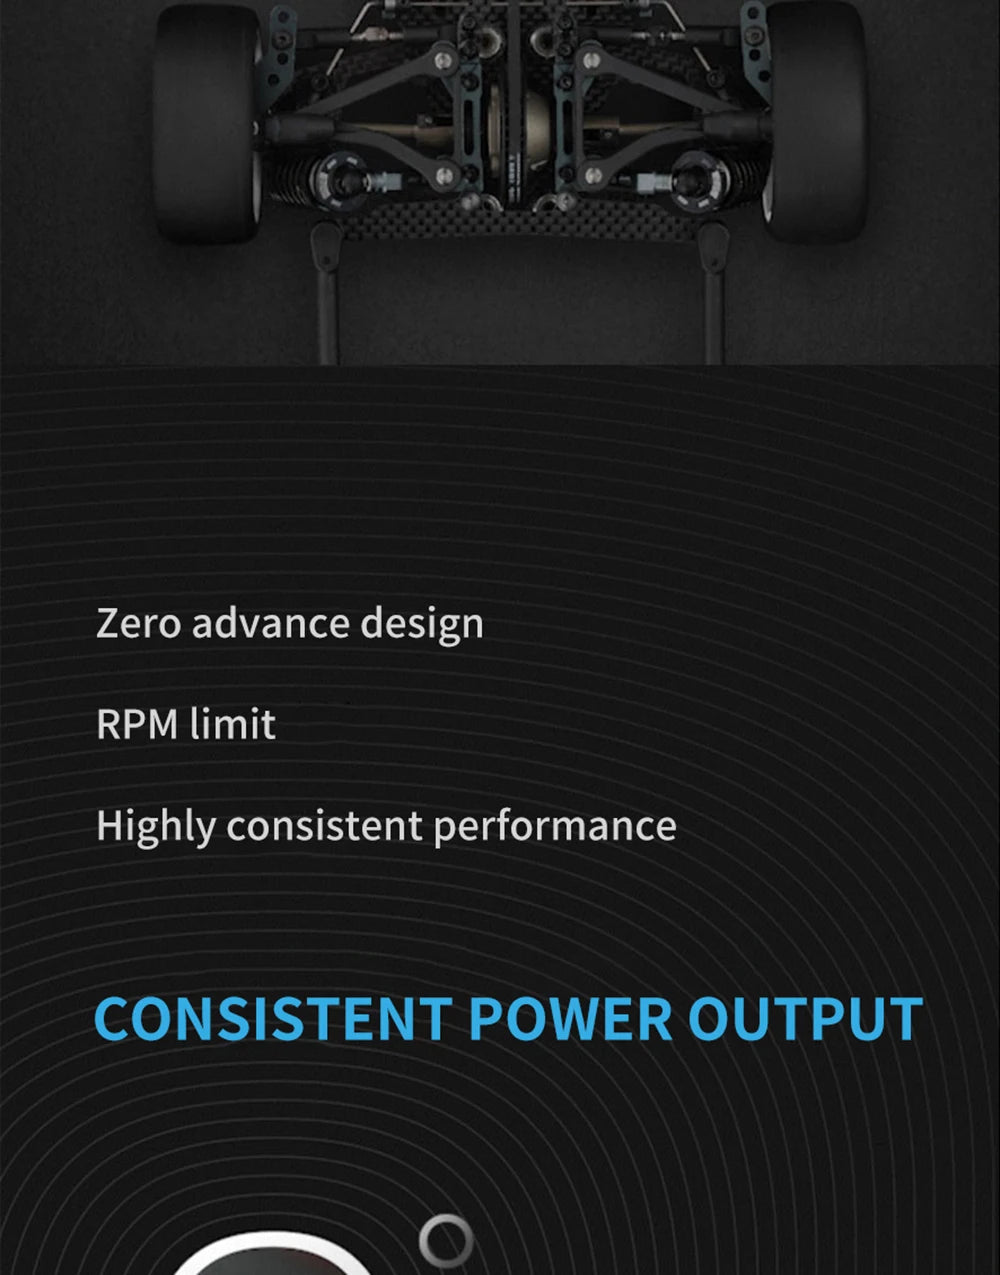 HOBBYWING XERUN XR10 Justock G3, Zero advance design RPM limit Highly consistent performance CONSISTENT POWER OUTP